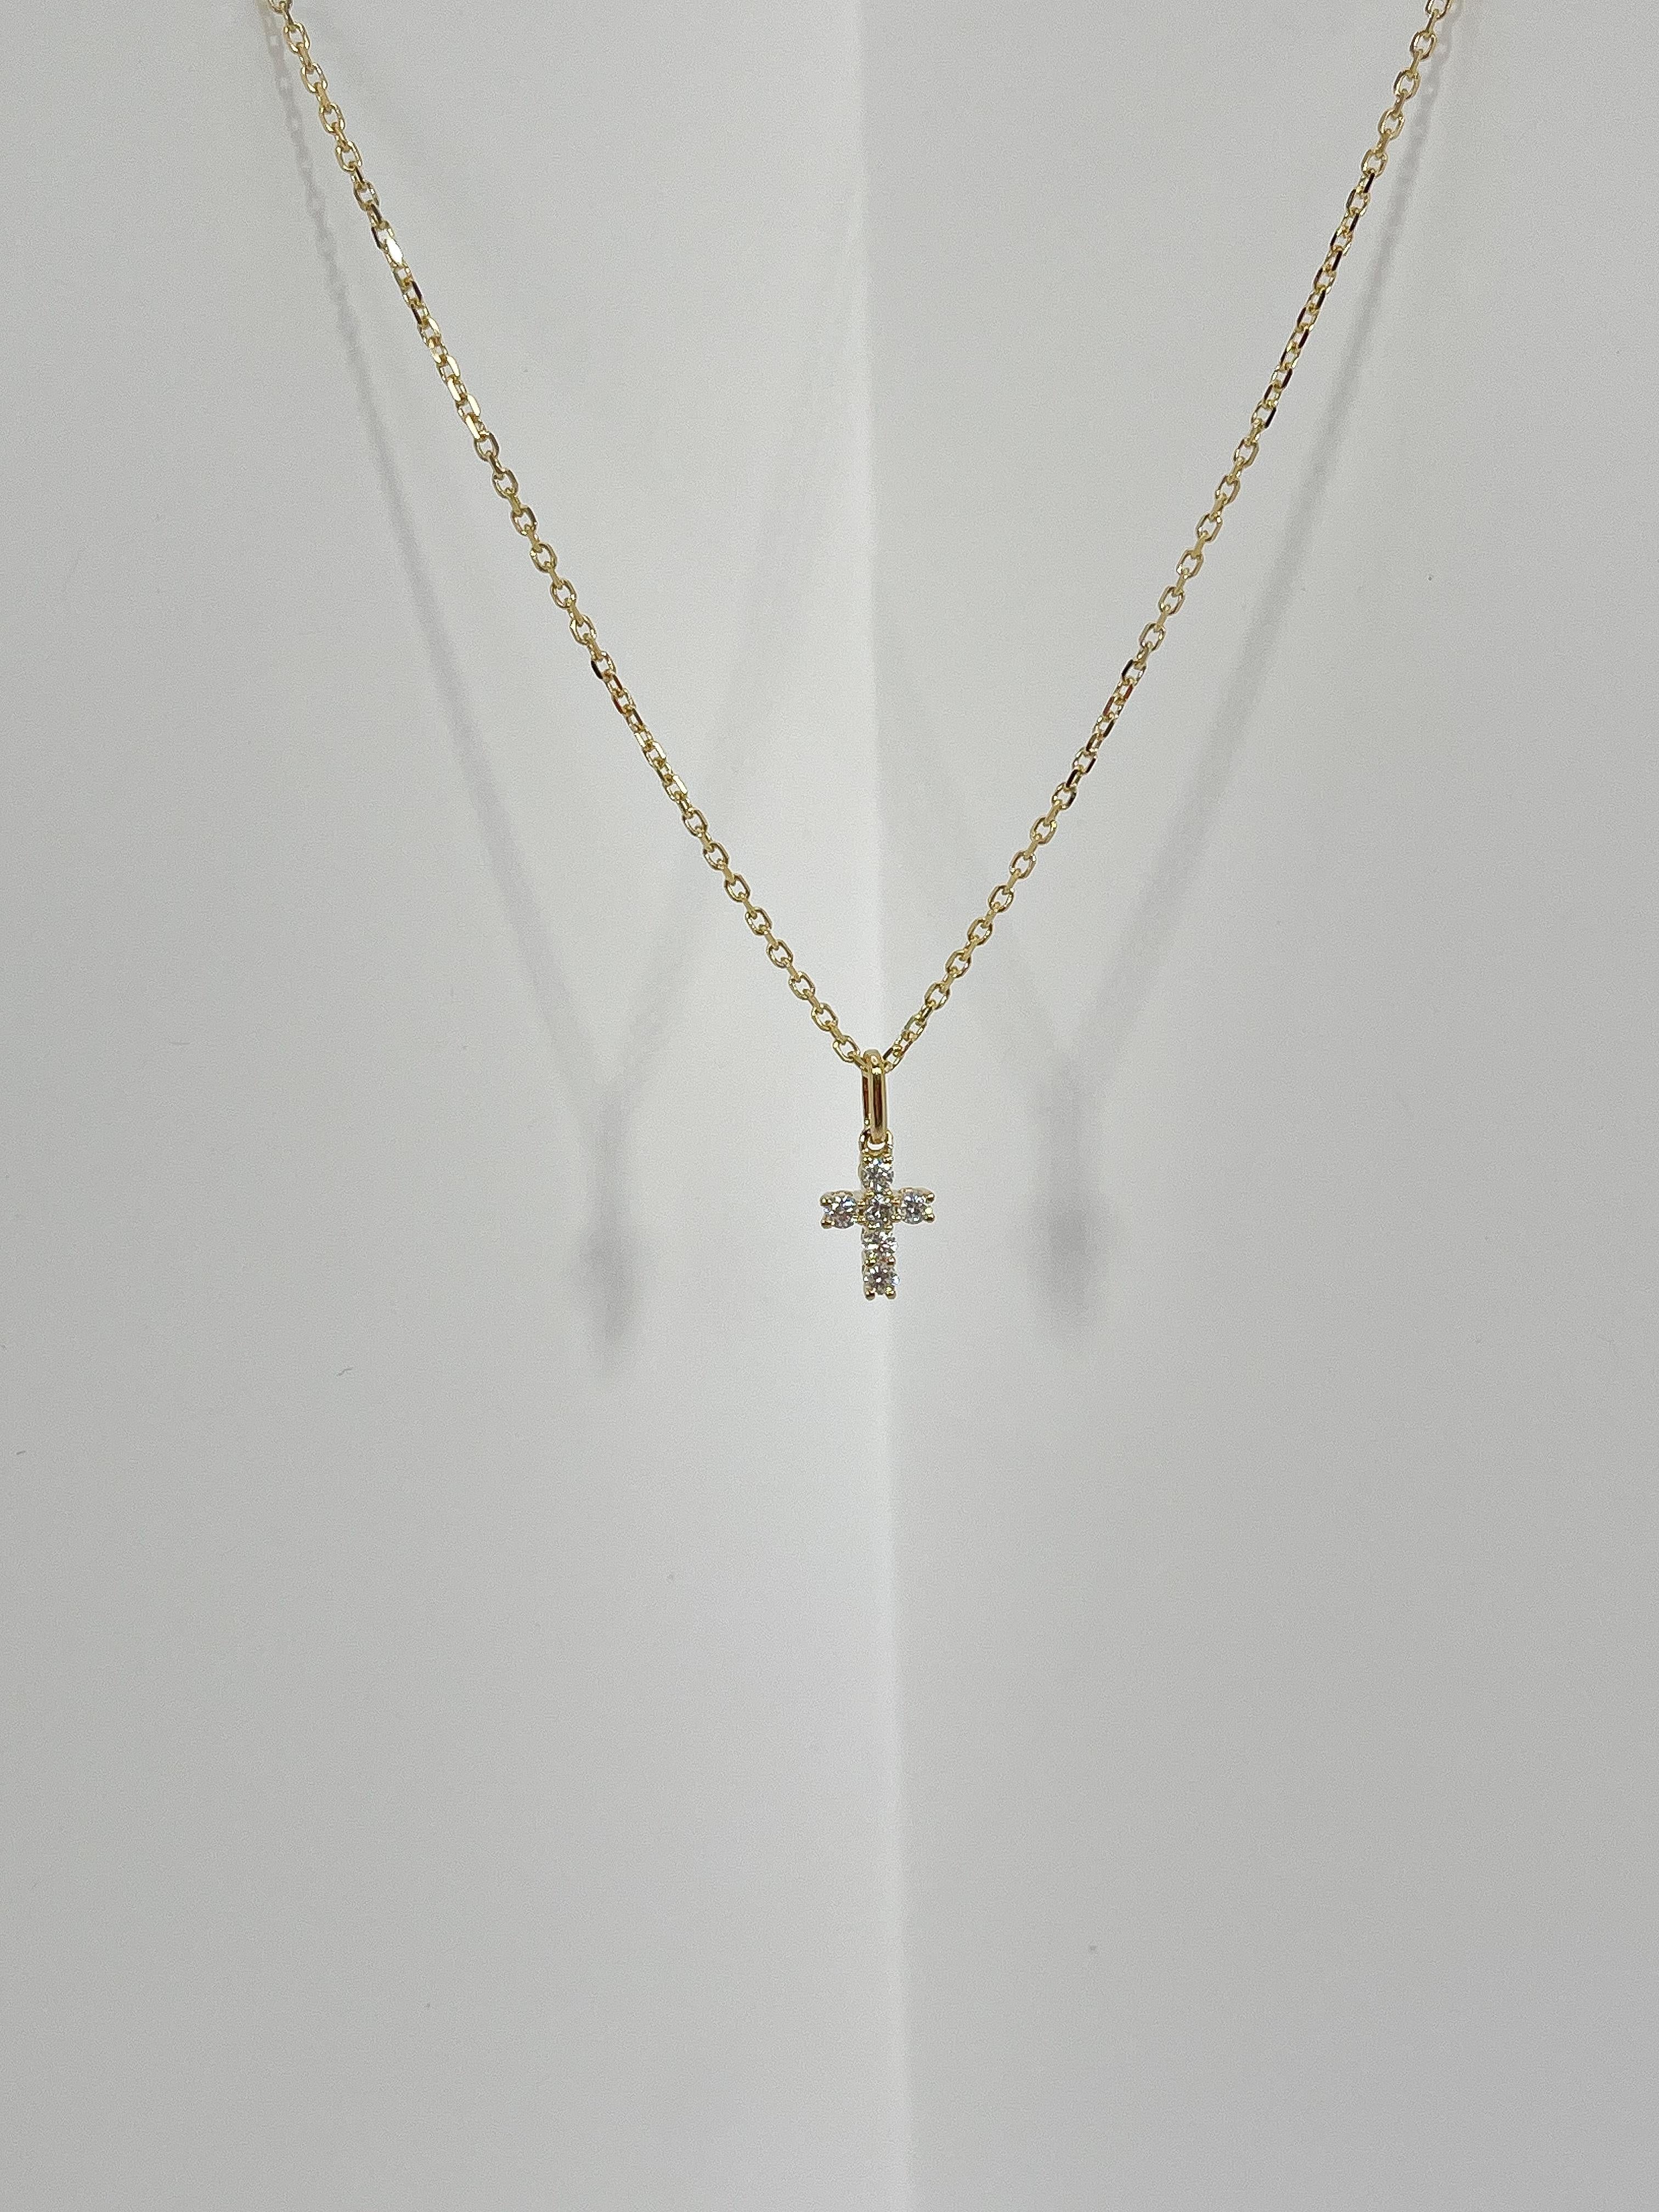 18k yellow gold .20 CTW diamond cross pendant necklace. The diamonds in the pendant are all round, pendant measures to be 8.7mm x 6.5mm, has a lobster clasp to open and close, pendant comes on an 18-inch diamond cut cable chain, and has a total